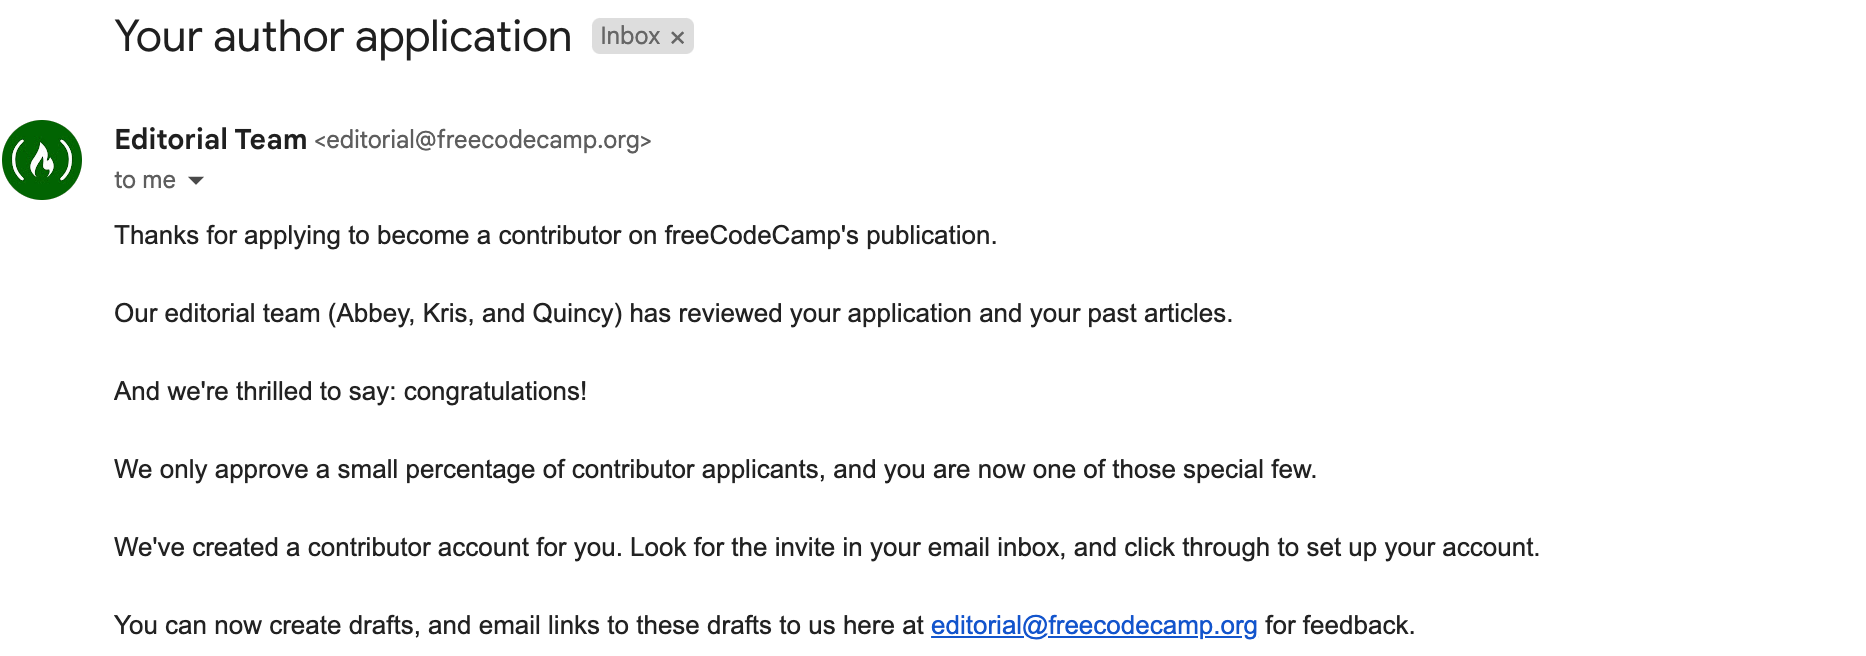 Application acceptance email from FreeCodeCamp's editoral team that